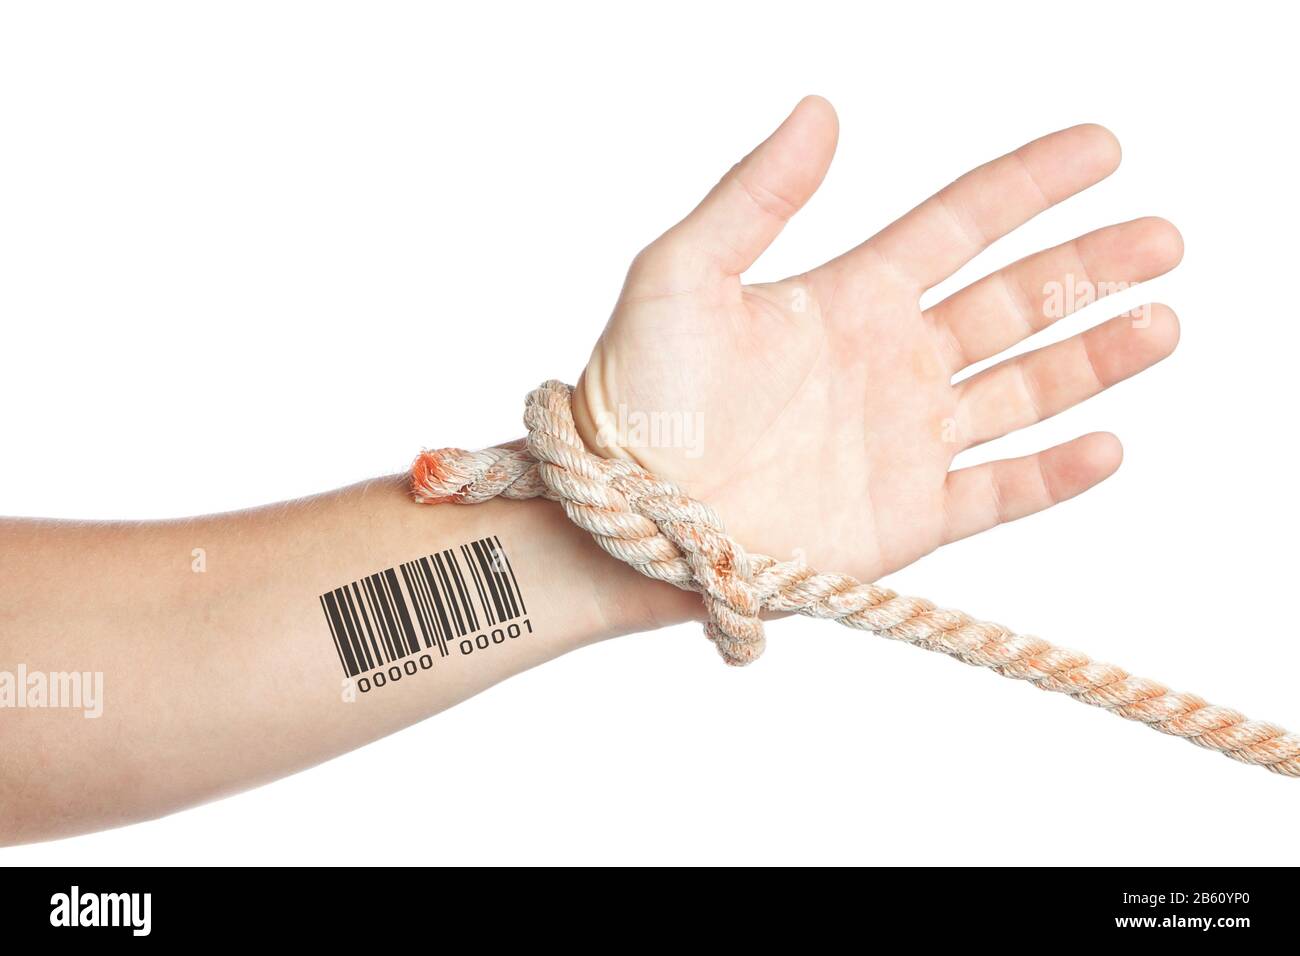 Limitation of personal privacy. Hand with barcode tied with a rope